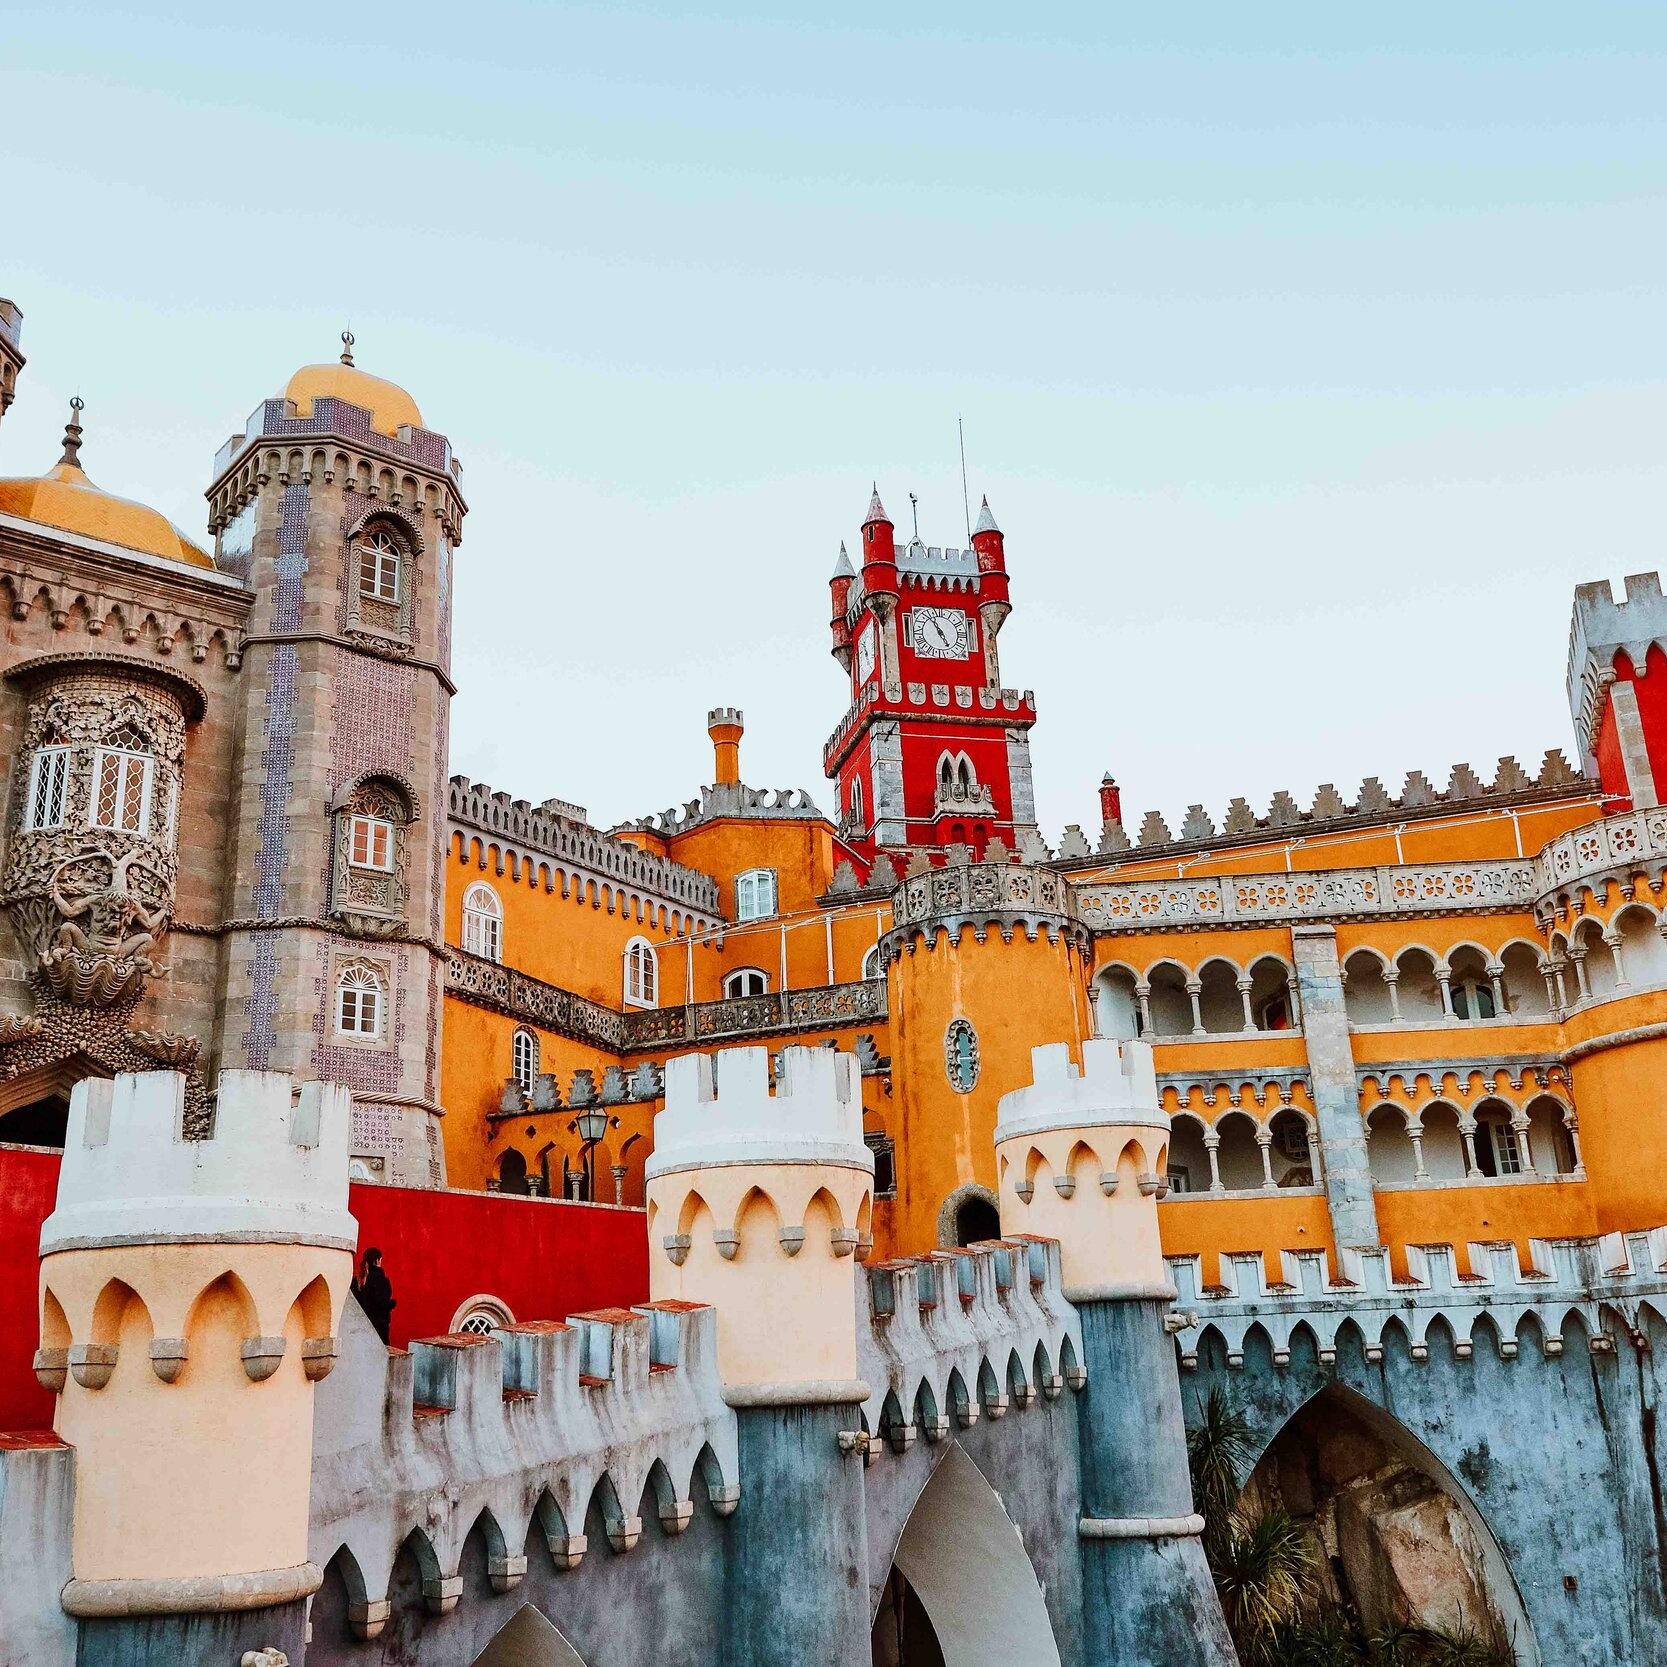 Colourful Pena palace in Sintra Portugal on a 3 month Europe trip budget itinerary